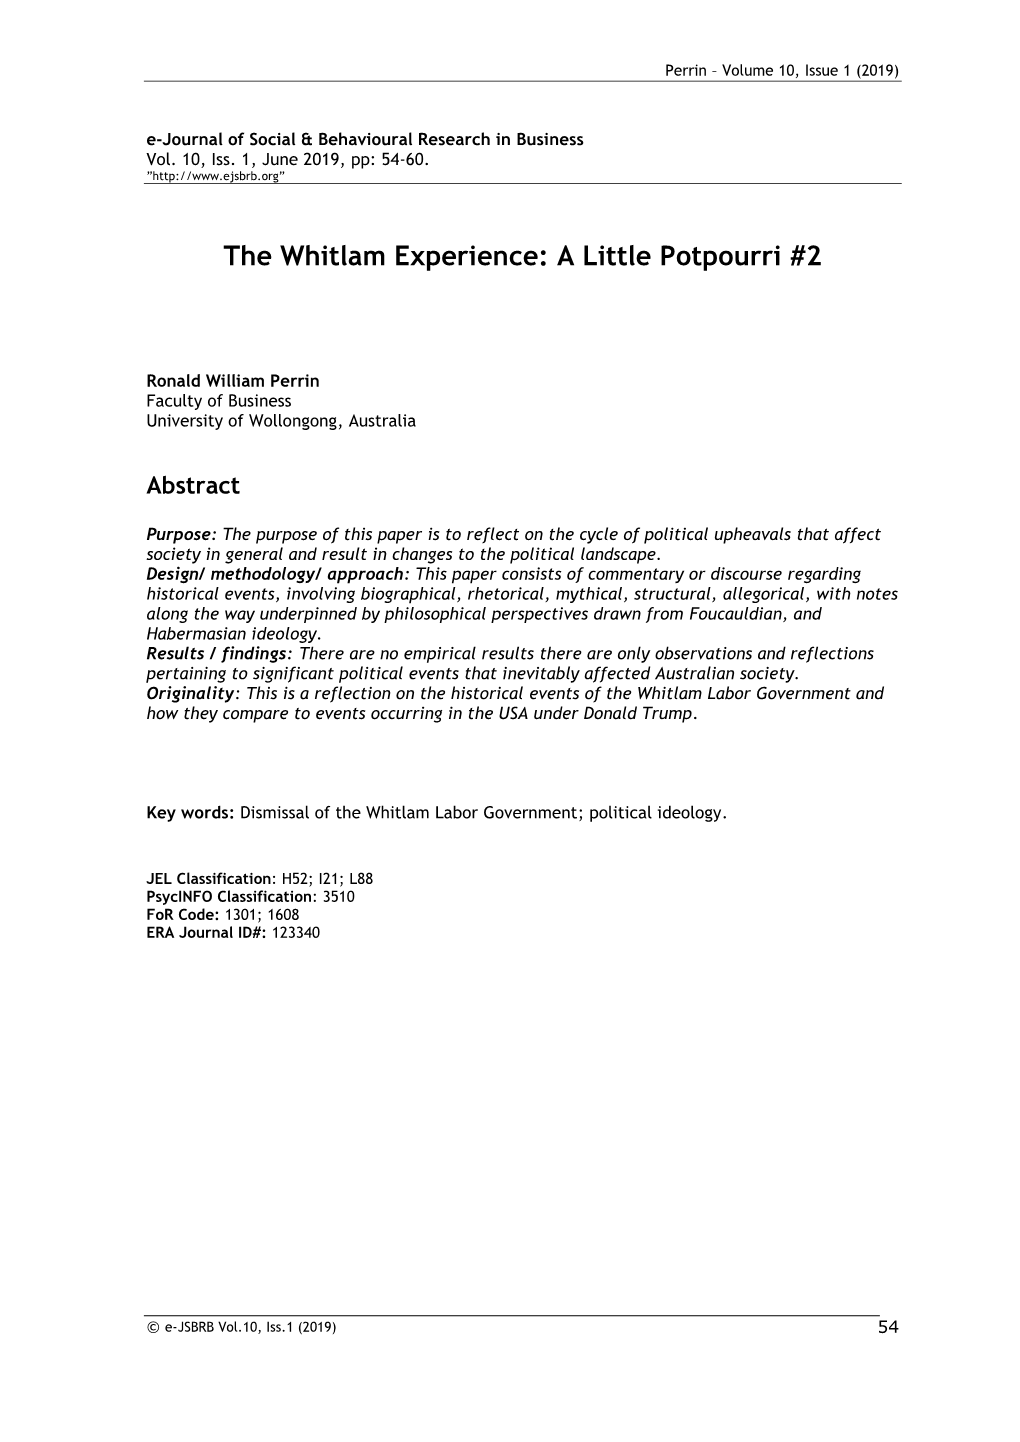 The Whitlam Experience: a Little Potpourri #2